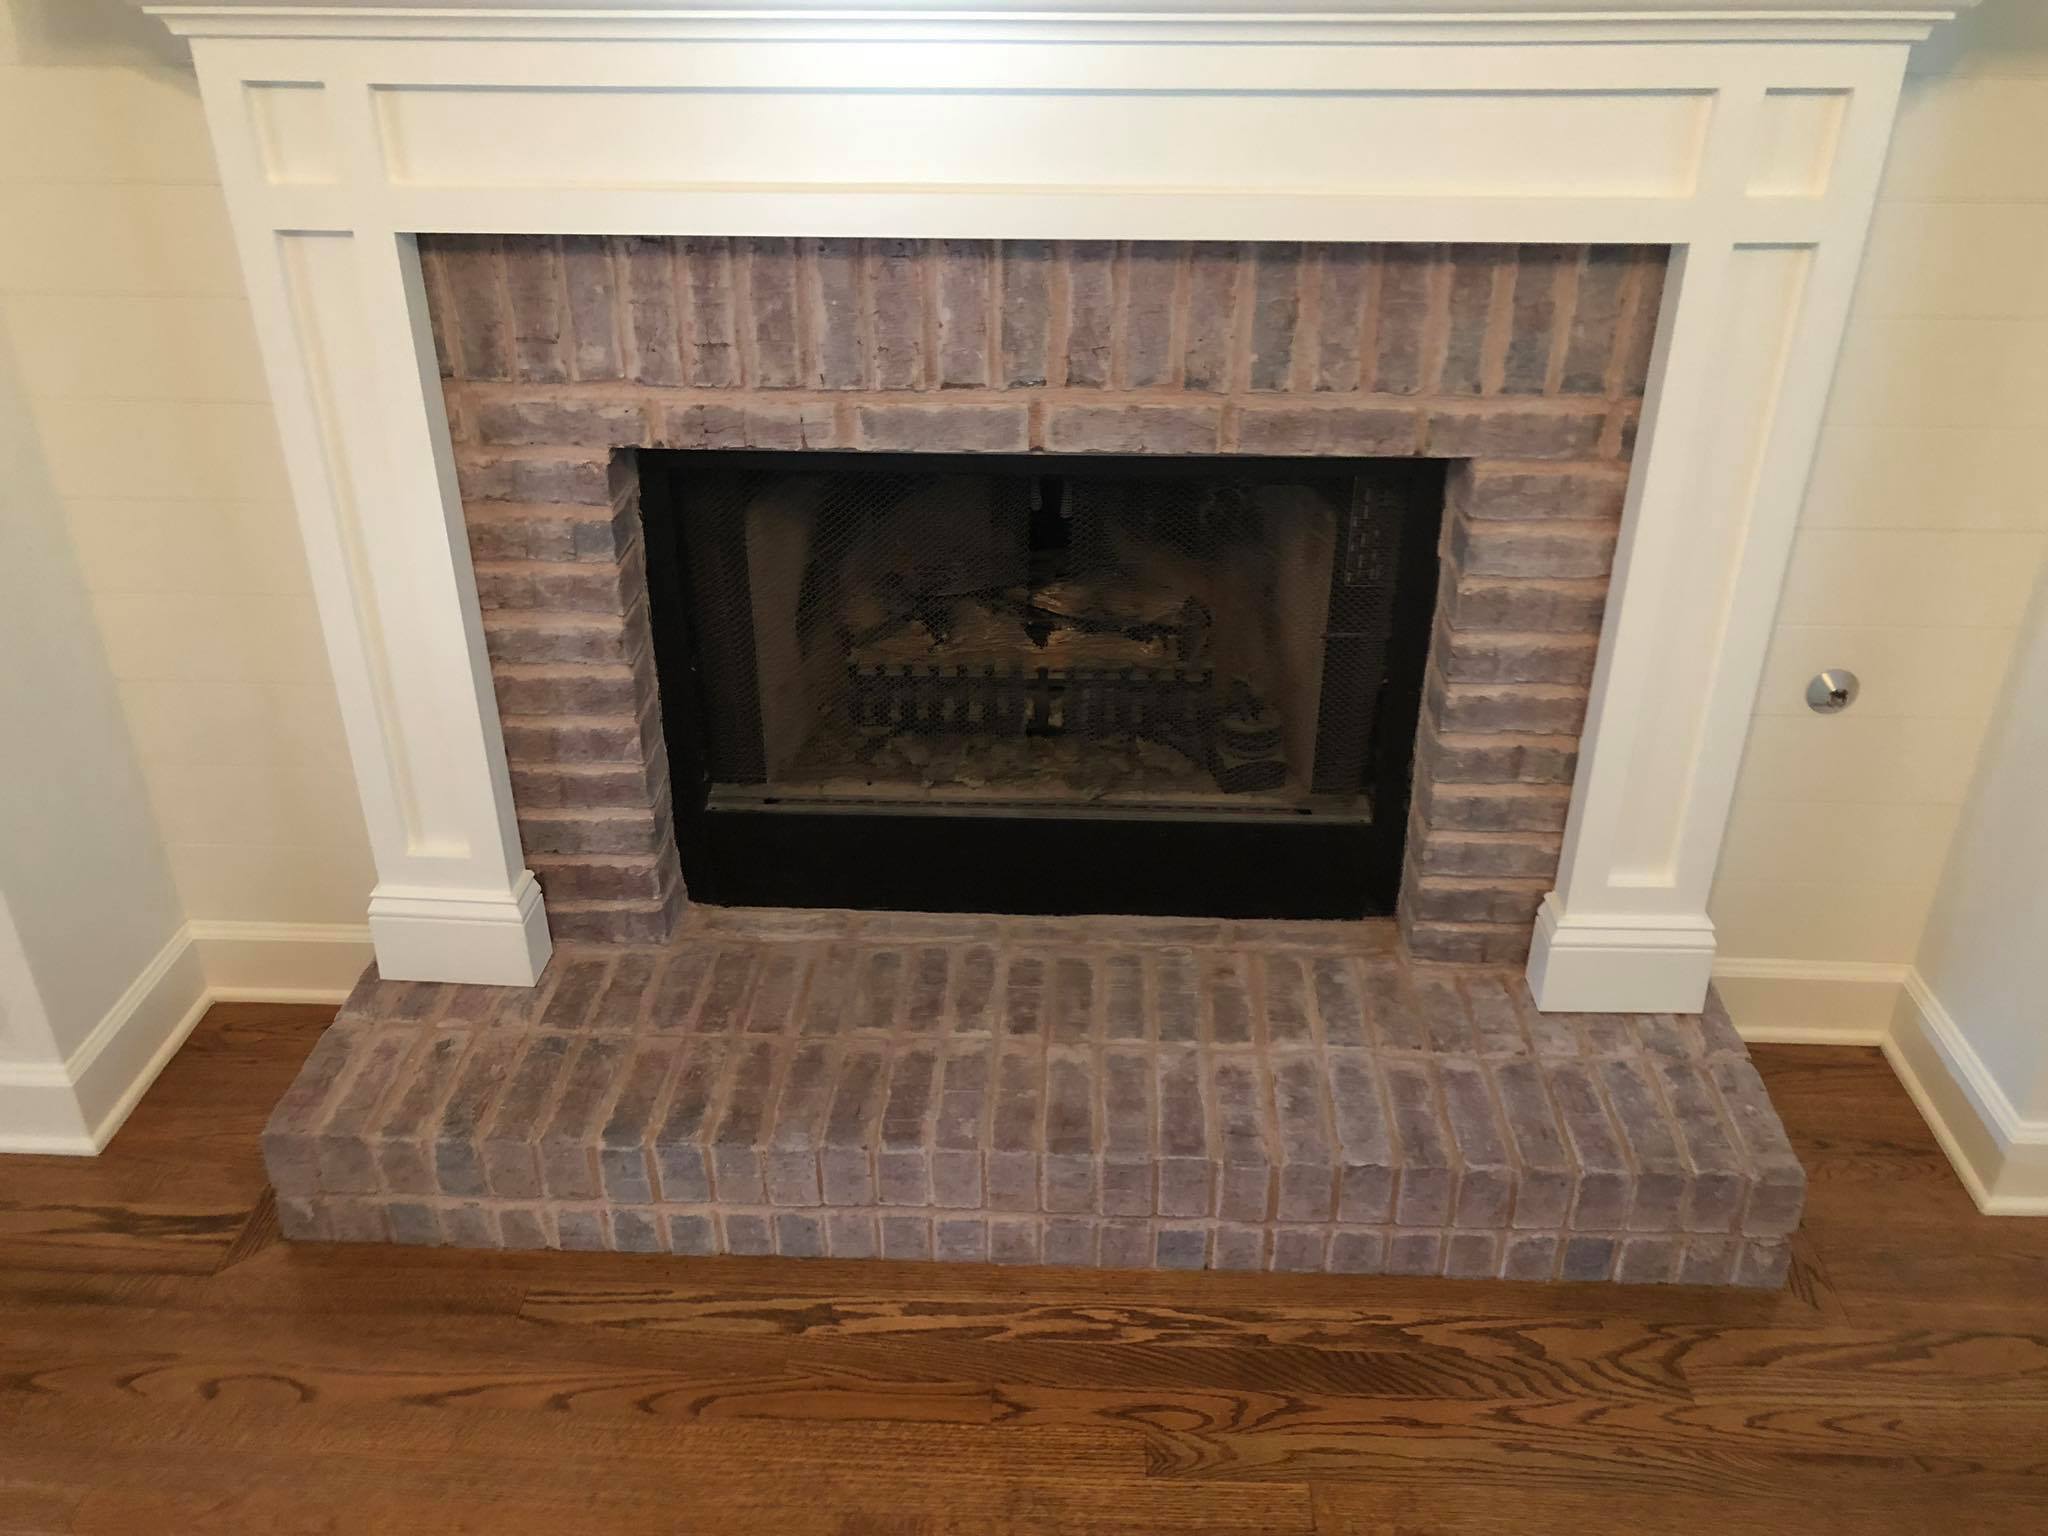 Completed Whitewash Stone on Fireplace Brick